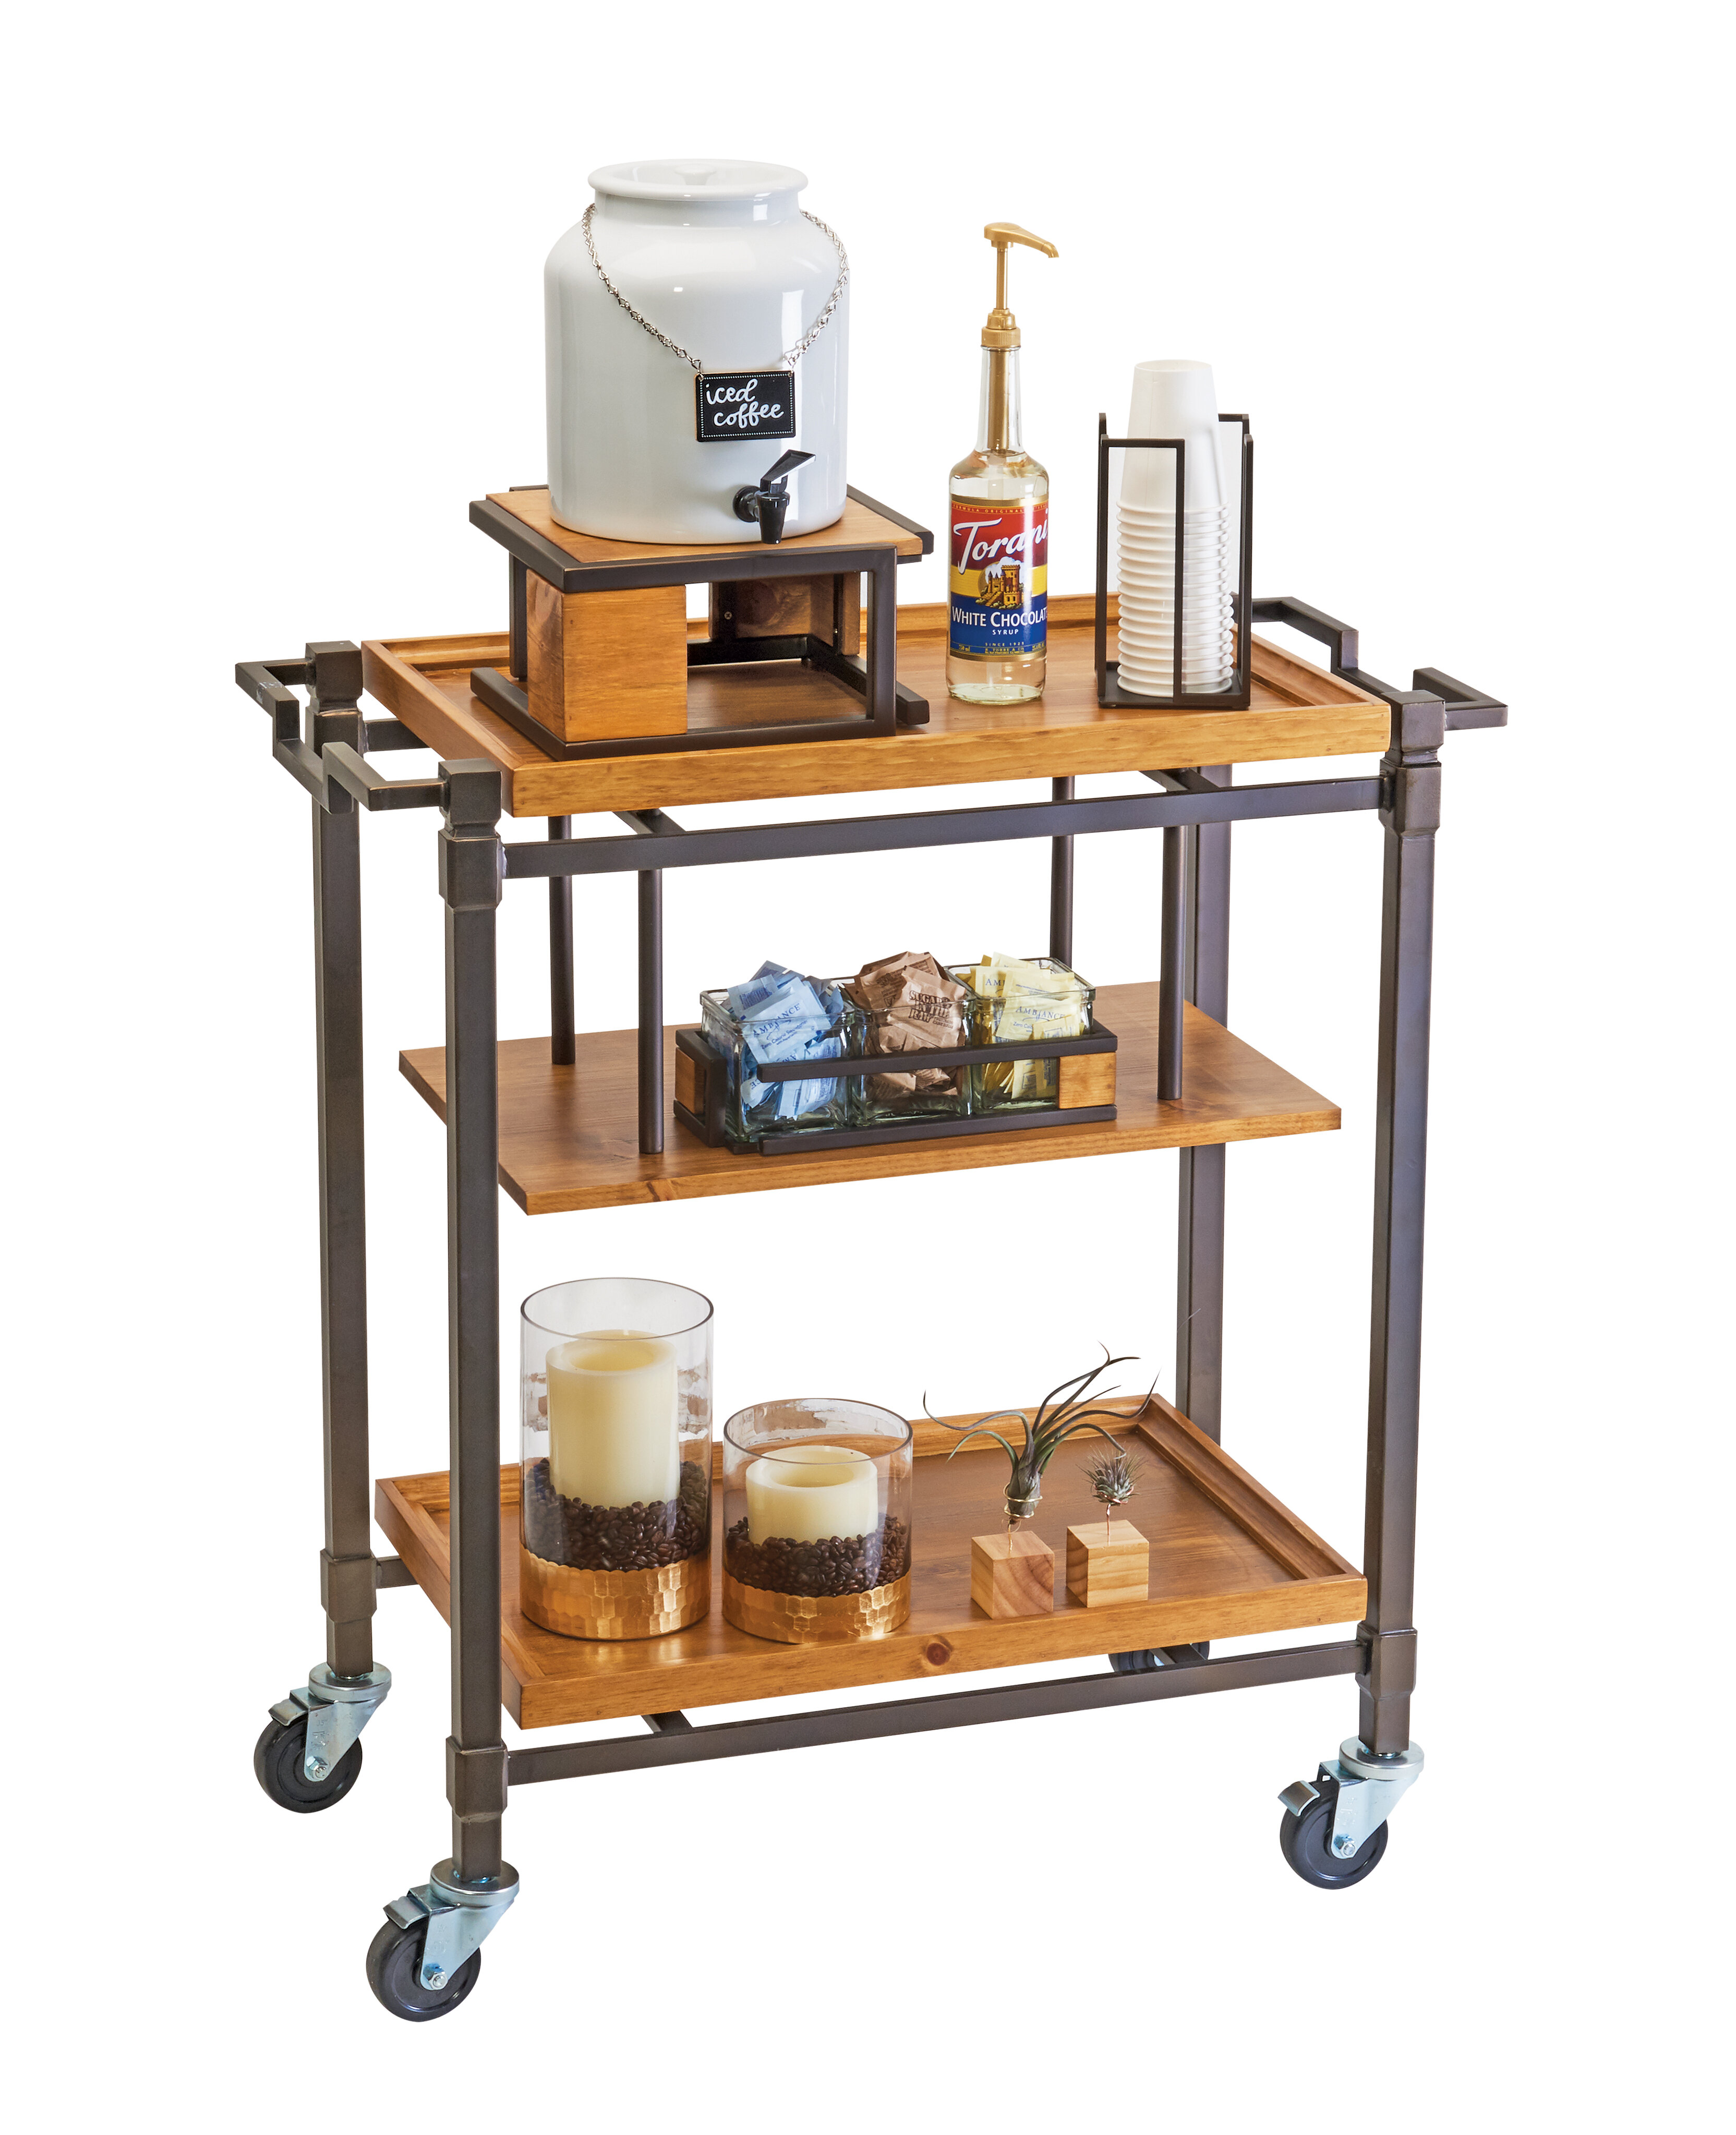 Wintage Style Serving Cart with Wine Rack and Glass Holder Industree Bar Cart Metal Wood Kitchen Cart on Wheels with Handle Rack 3 Tier Storage Shelves